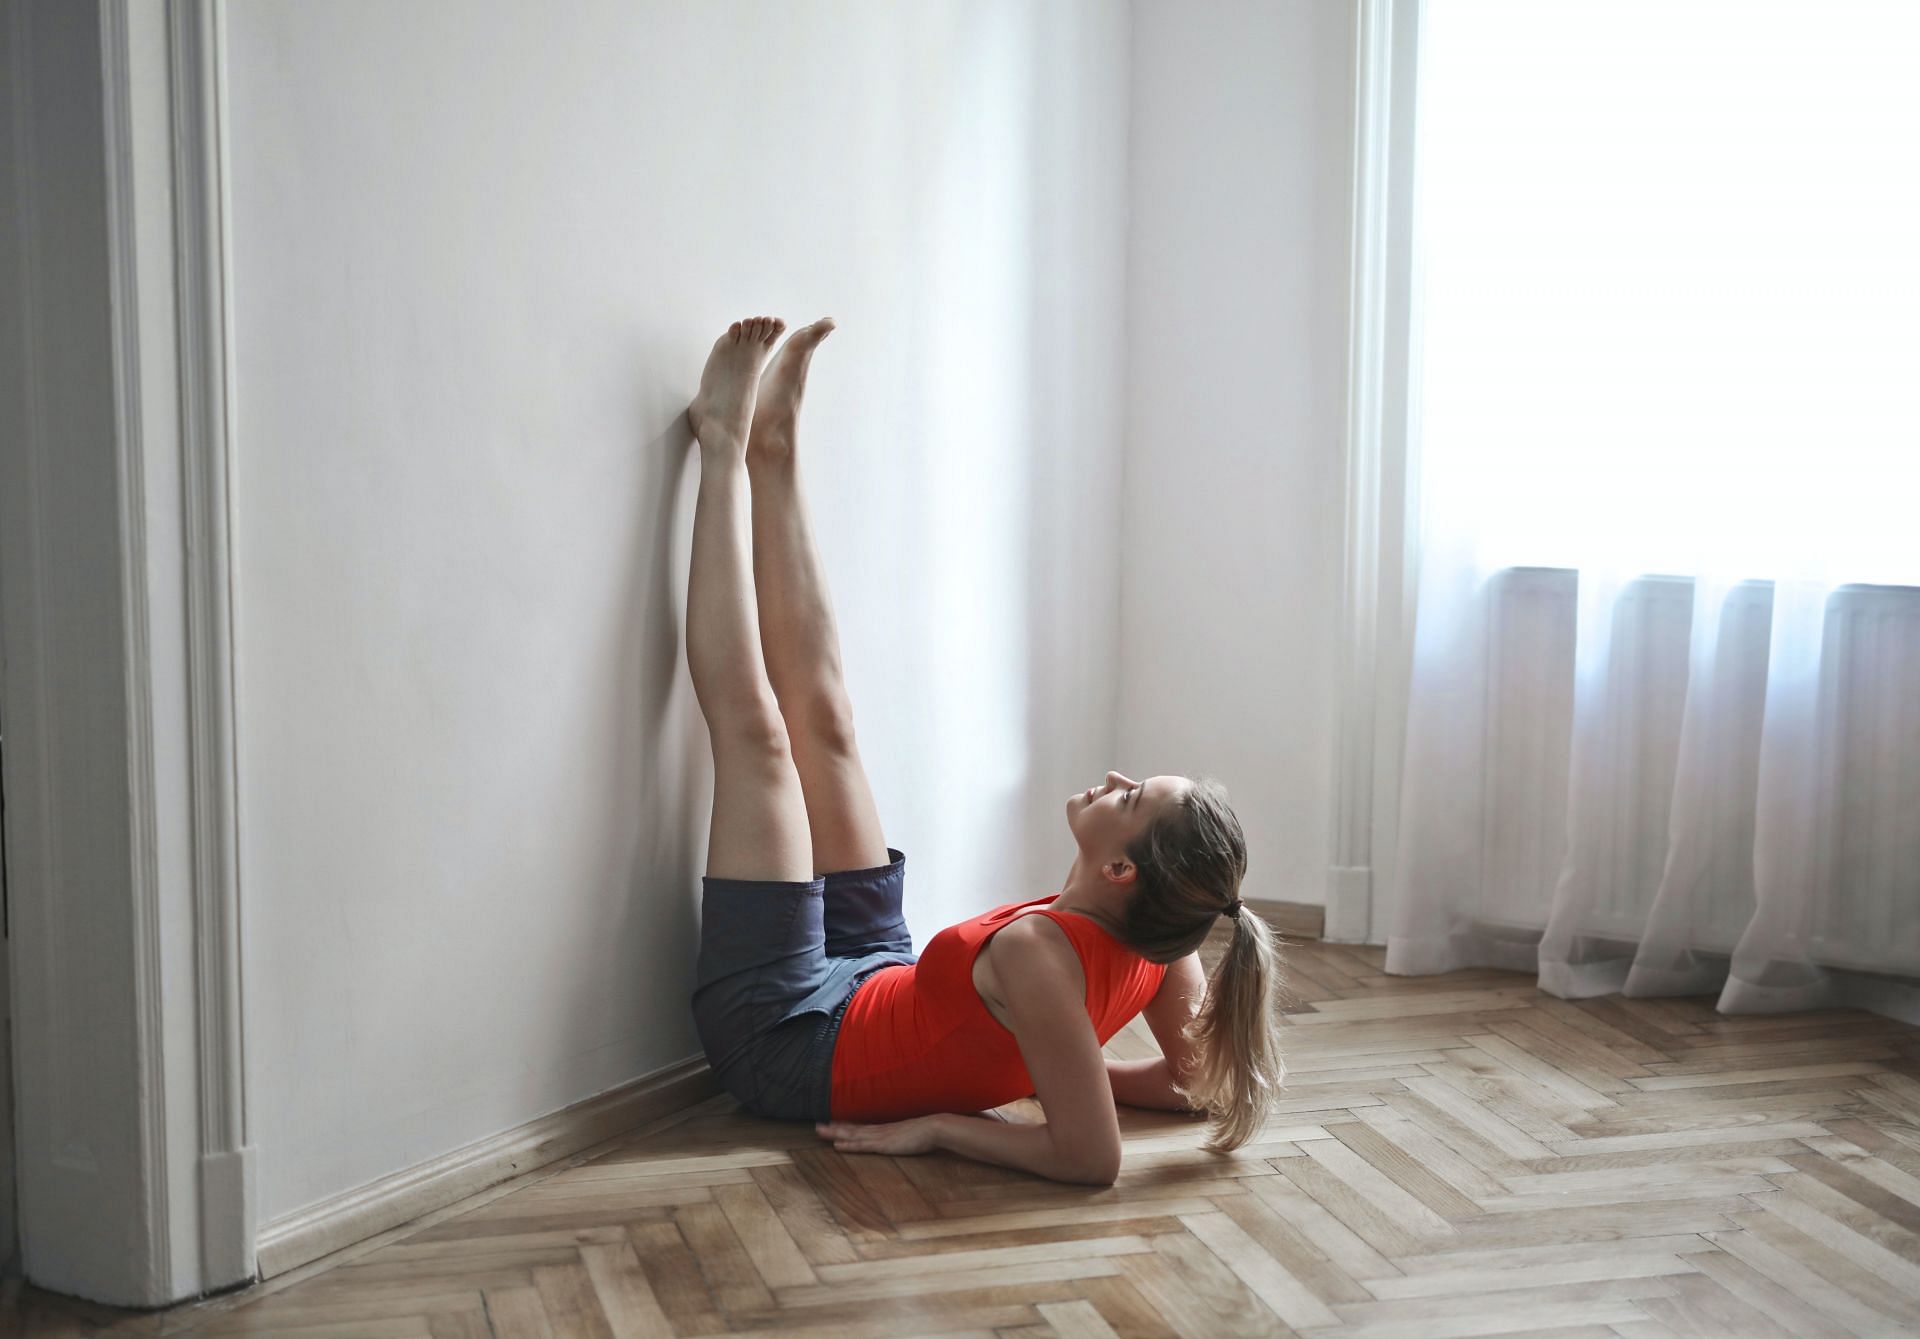 The Wall Angel - why you need this exercise in your life